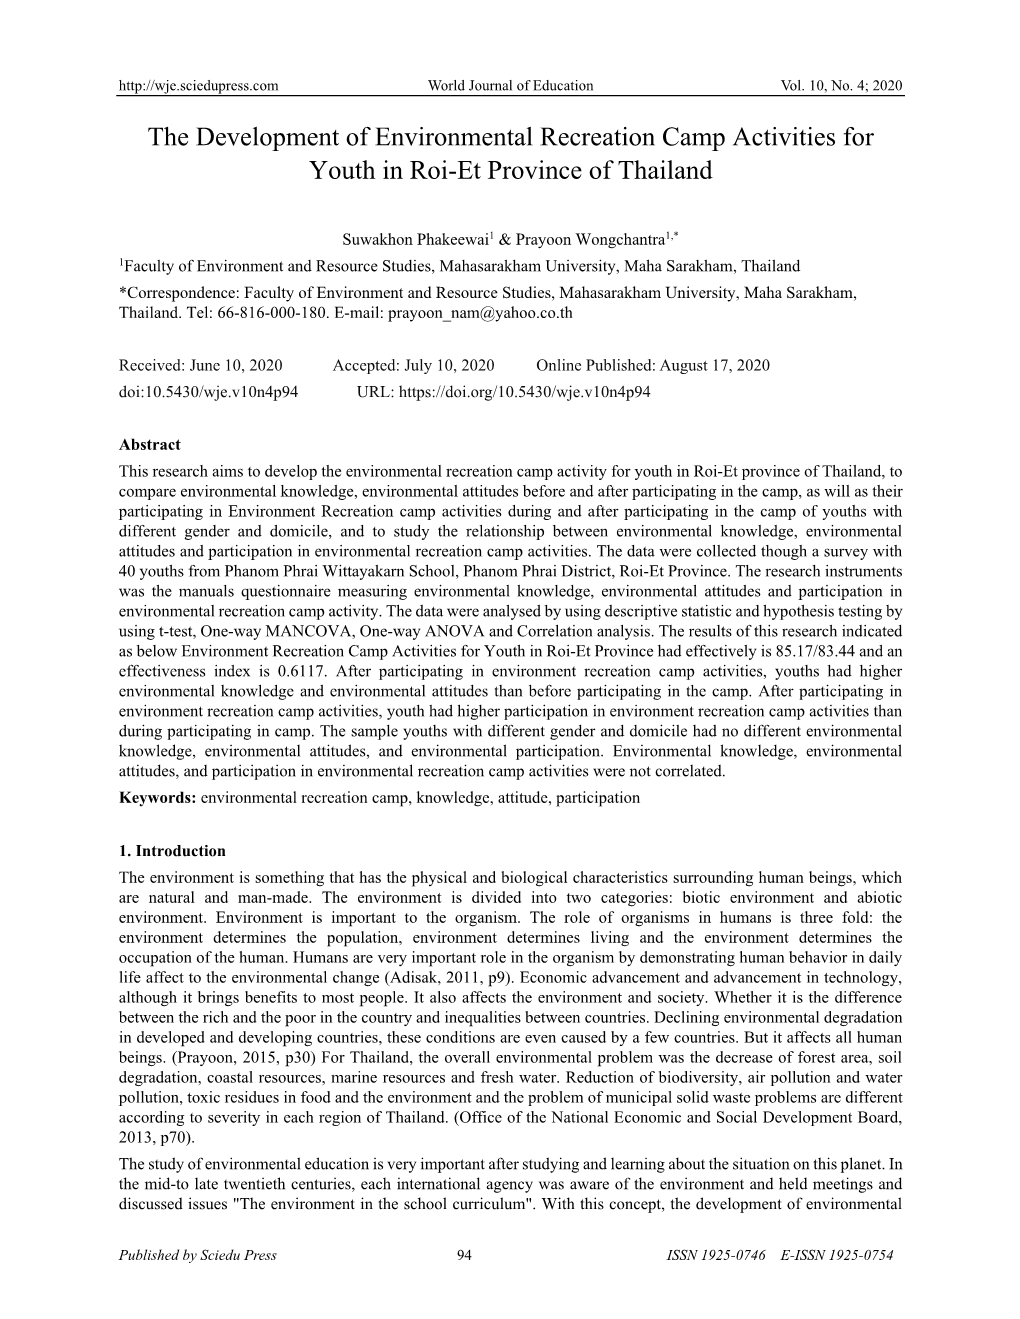 The Development of Environmental Recreation Camp Activities for Youth in Roi-Et Province of Thailand